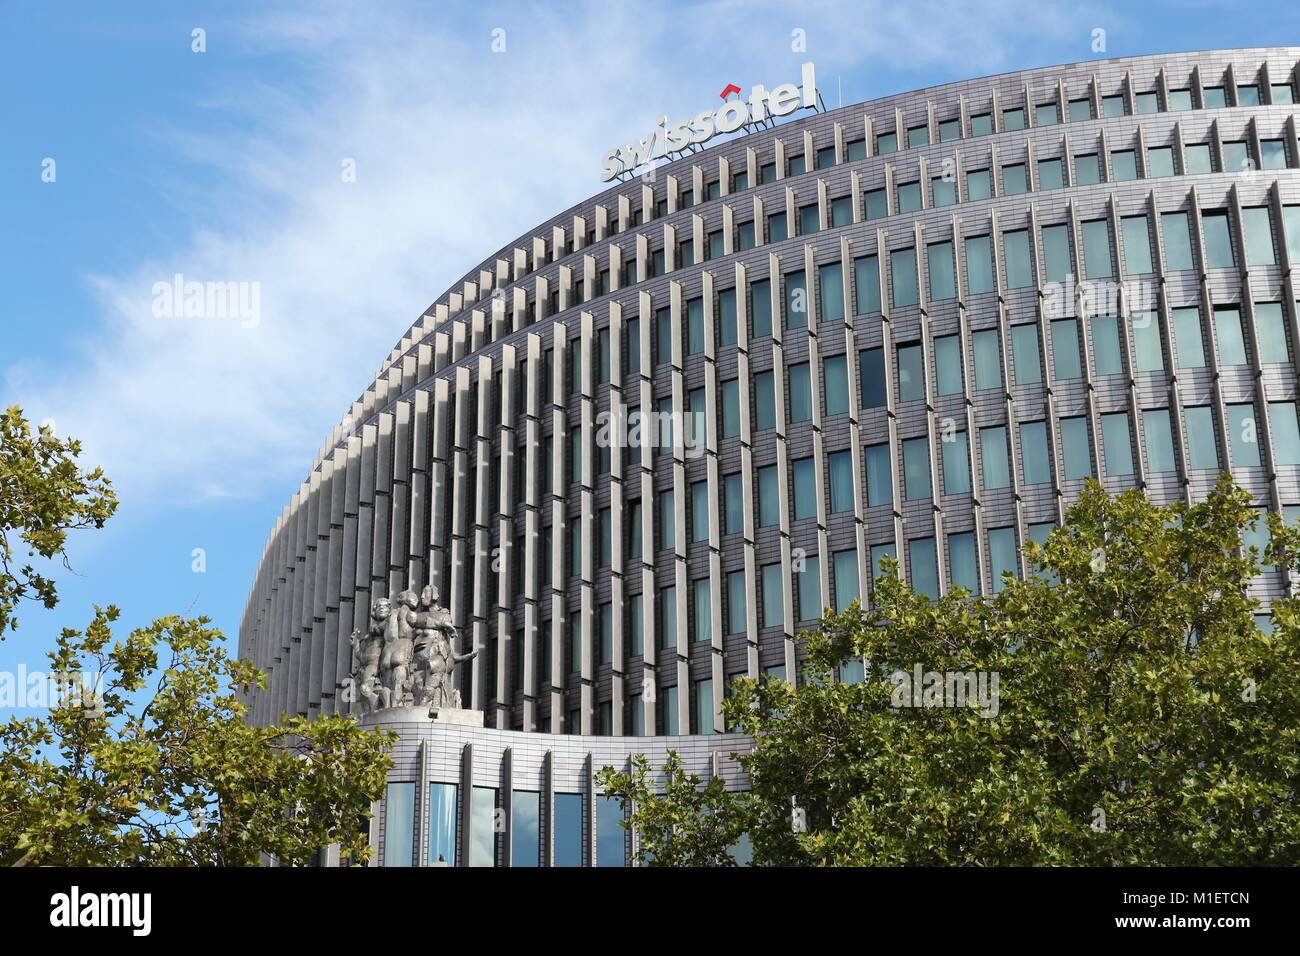 BERLIN, GERMANY - AUGUST 27, 2014: Swissotel hotel in Berlin. It is part of FRHI Hotels & Resorts group which 105 hotels and resorts and employs 42,00 Stock Photo